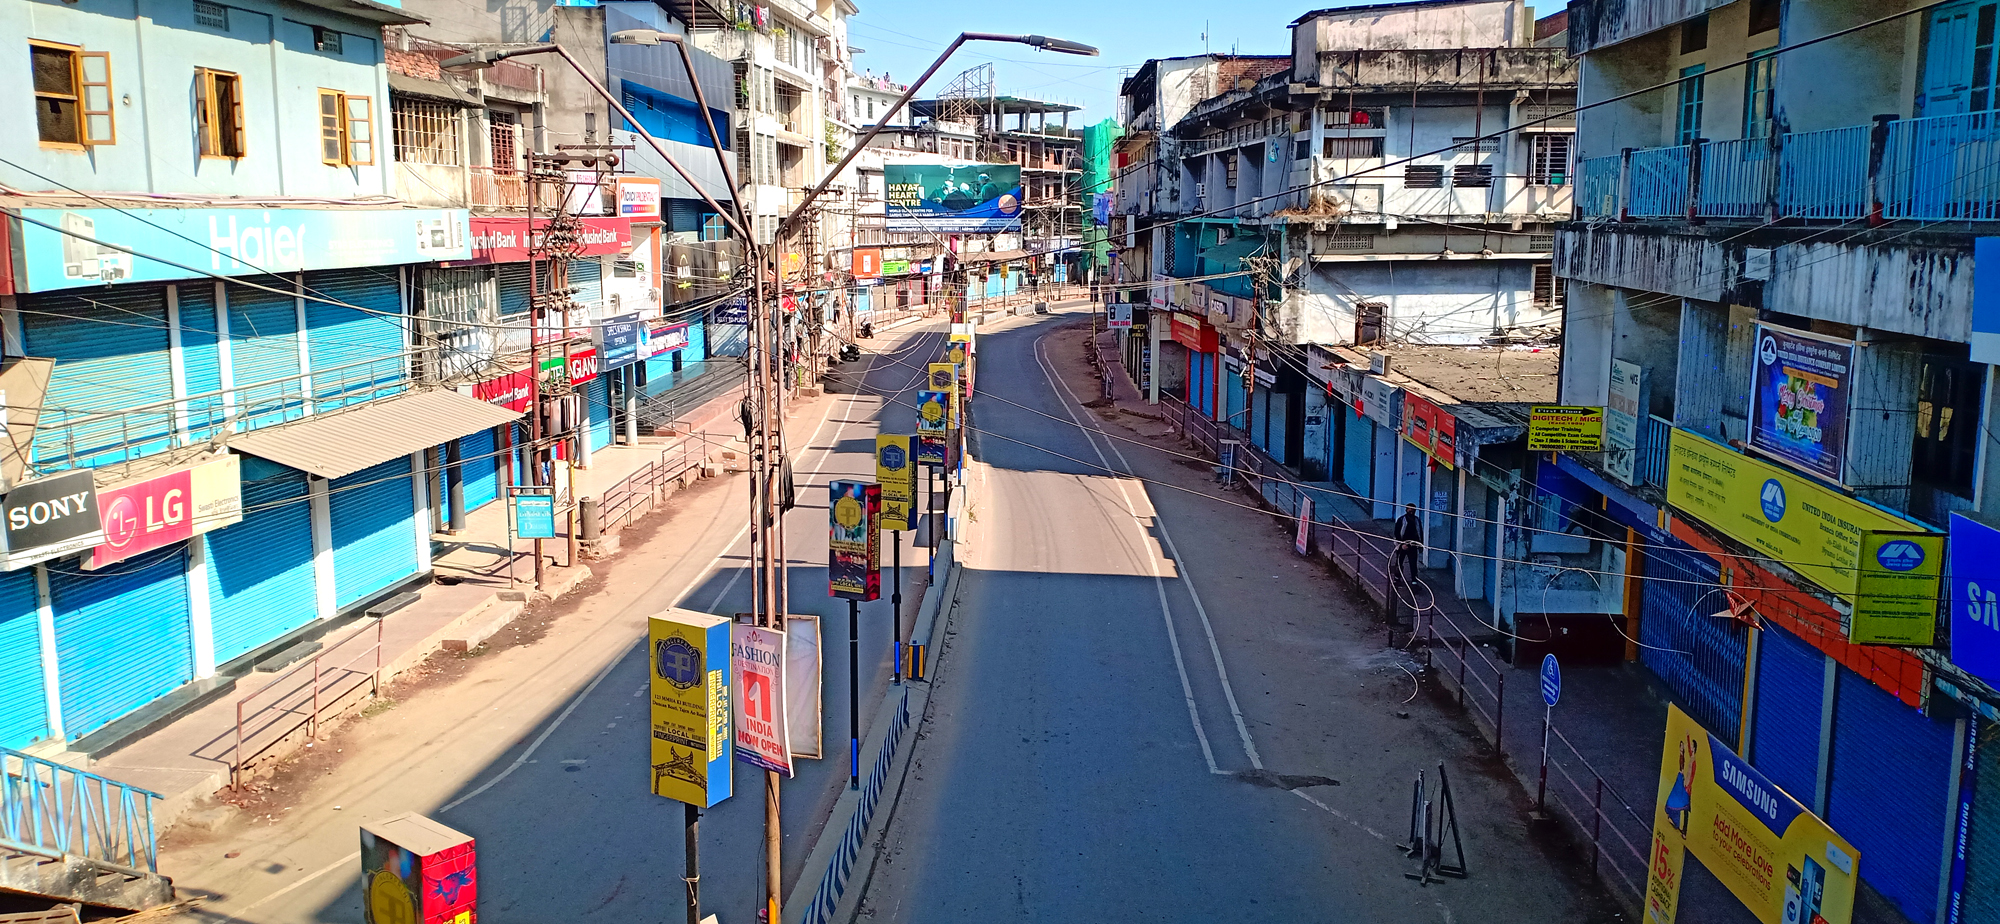 The usually busy Nyamo Lotha Road, Dimapur wears a deserted look during the bandh period on Saturday, December 14. (Morung Photo)